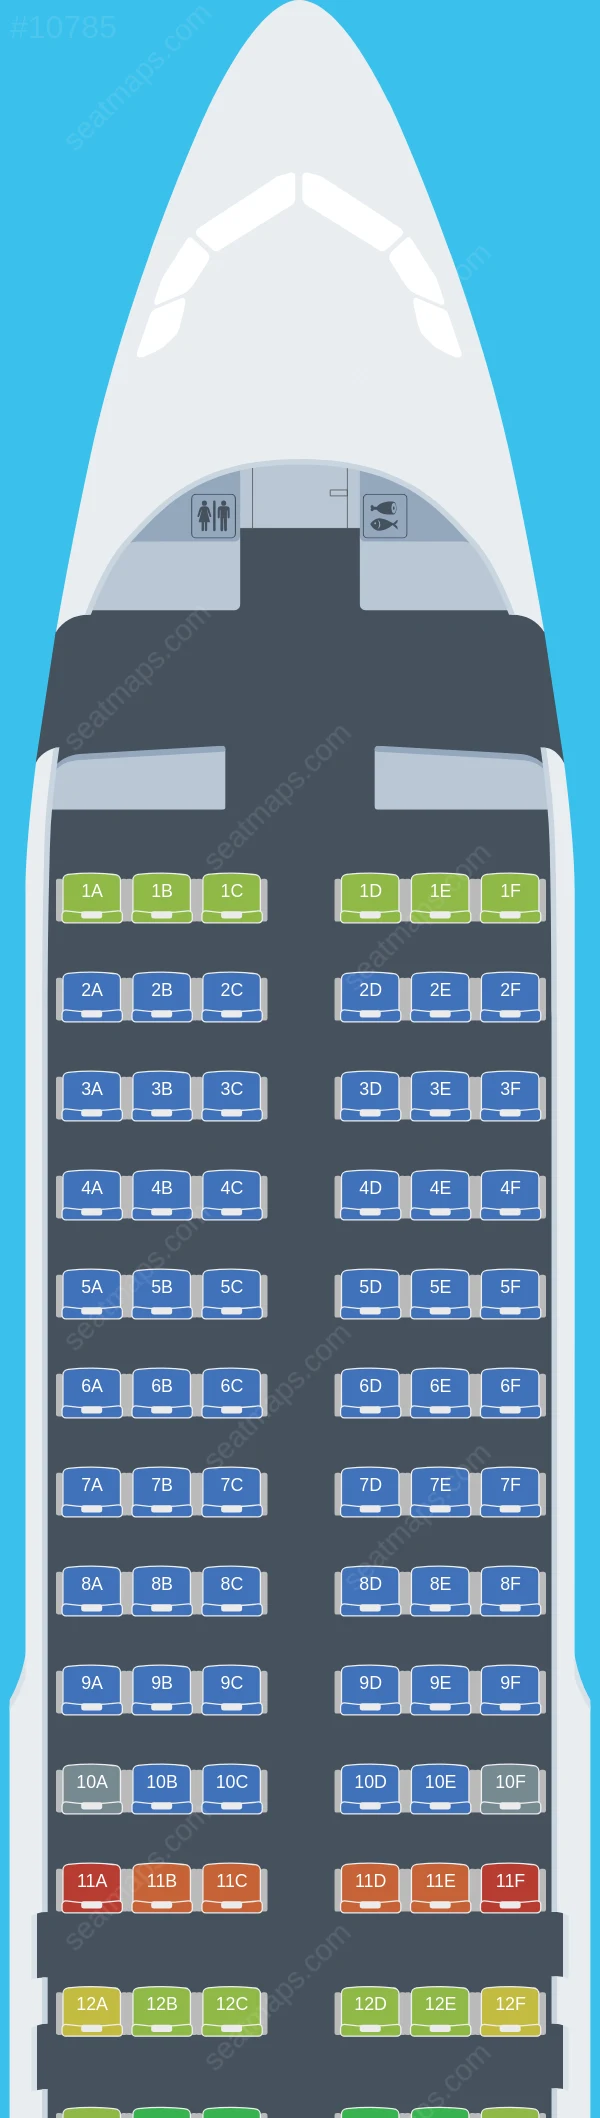 Tus Airways Airbus A320-200 seatmap preview